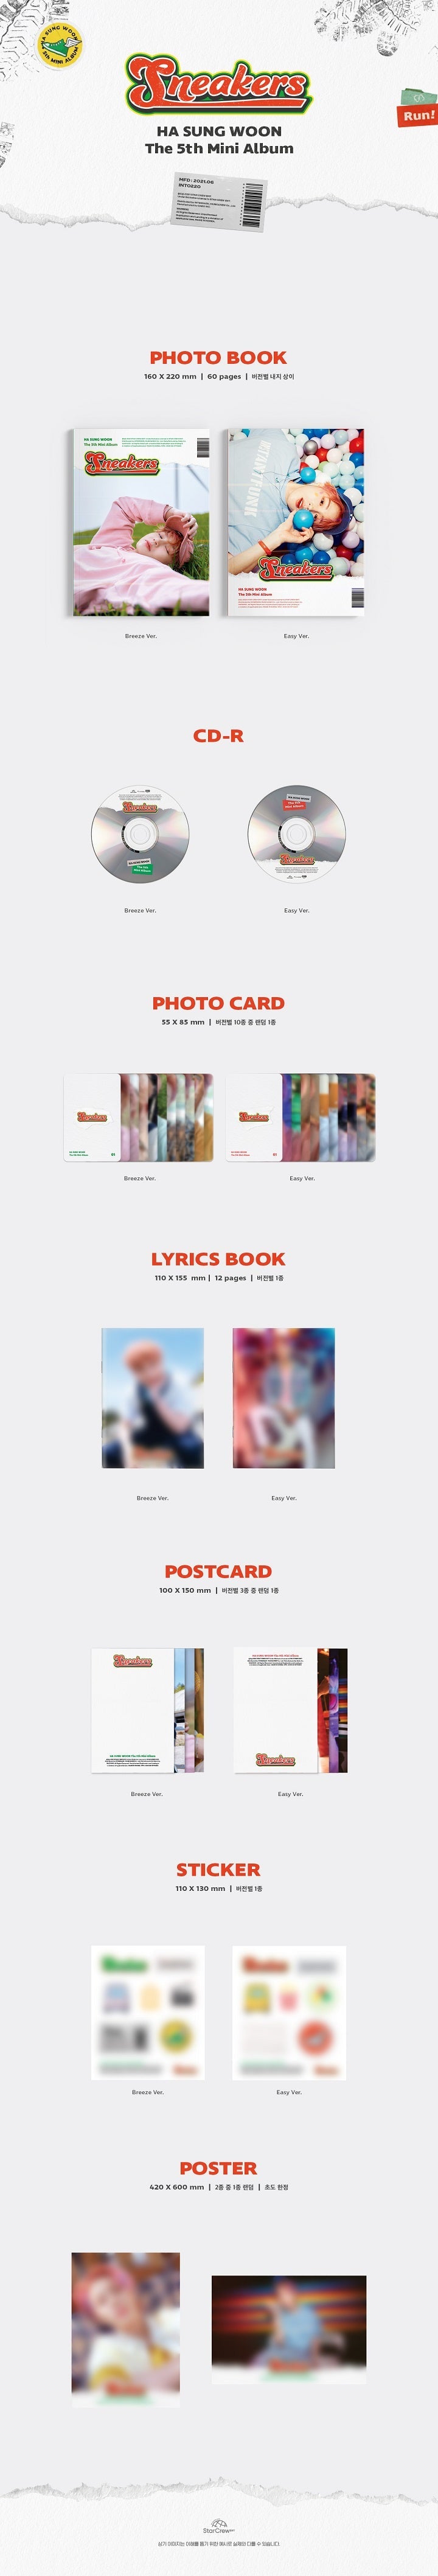 1 CD
1 Photo Book (60 pages)
1 Photo Card (random out of 10 types)
1 Lyrics Book (12 pages)
1 Post Card (random out of 3 t...